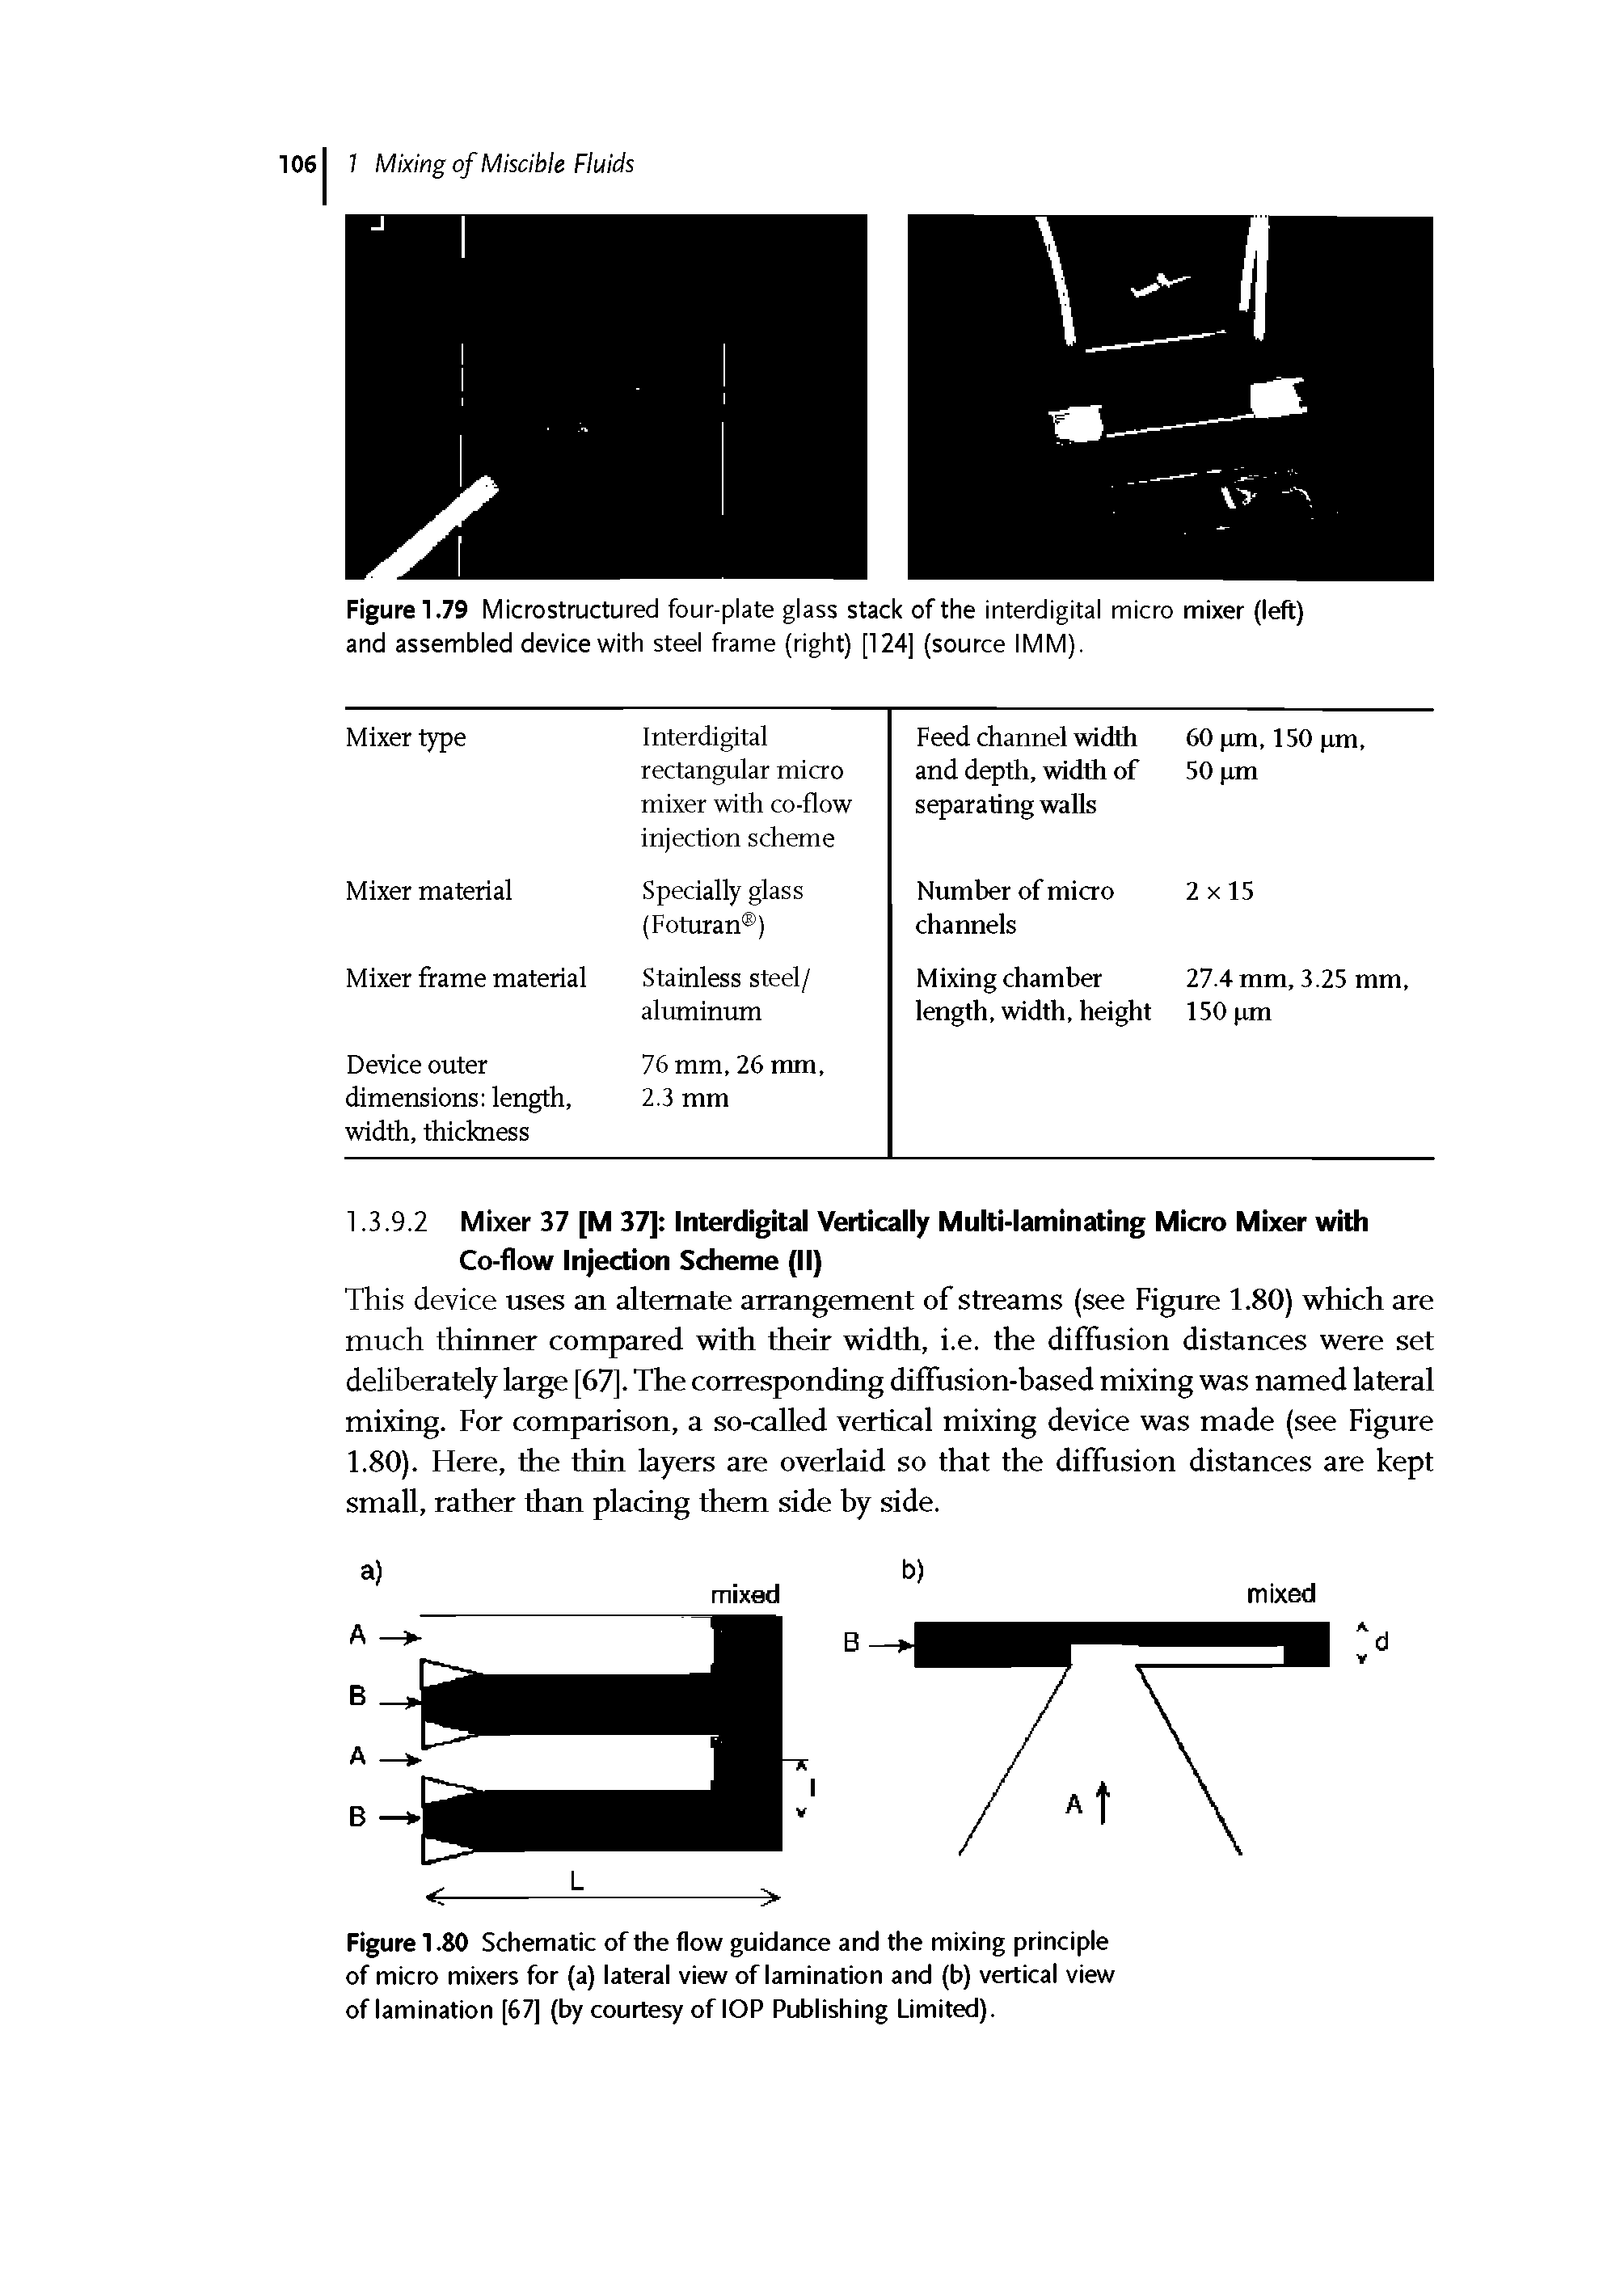 Figure 1.80 Schematic of the flow guidance and the mixing principle of micro mixers for (a) lateral view of lamination and (b) vertical view of lamination [67] (by courtesy of IOP Publishing Limited).